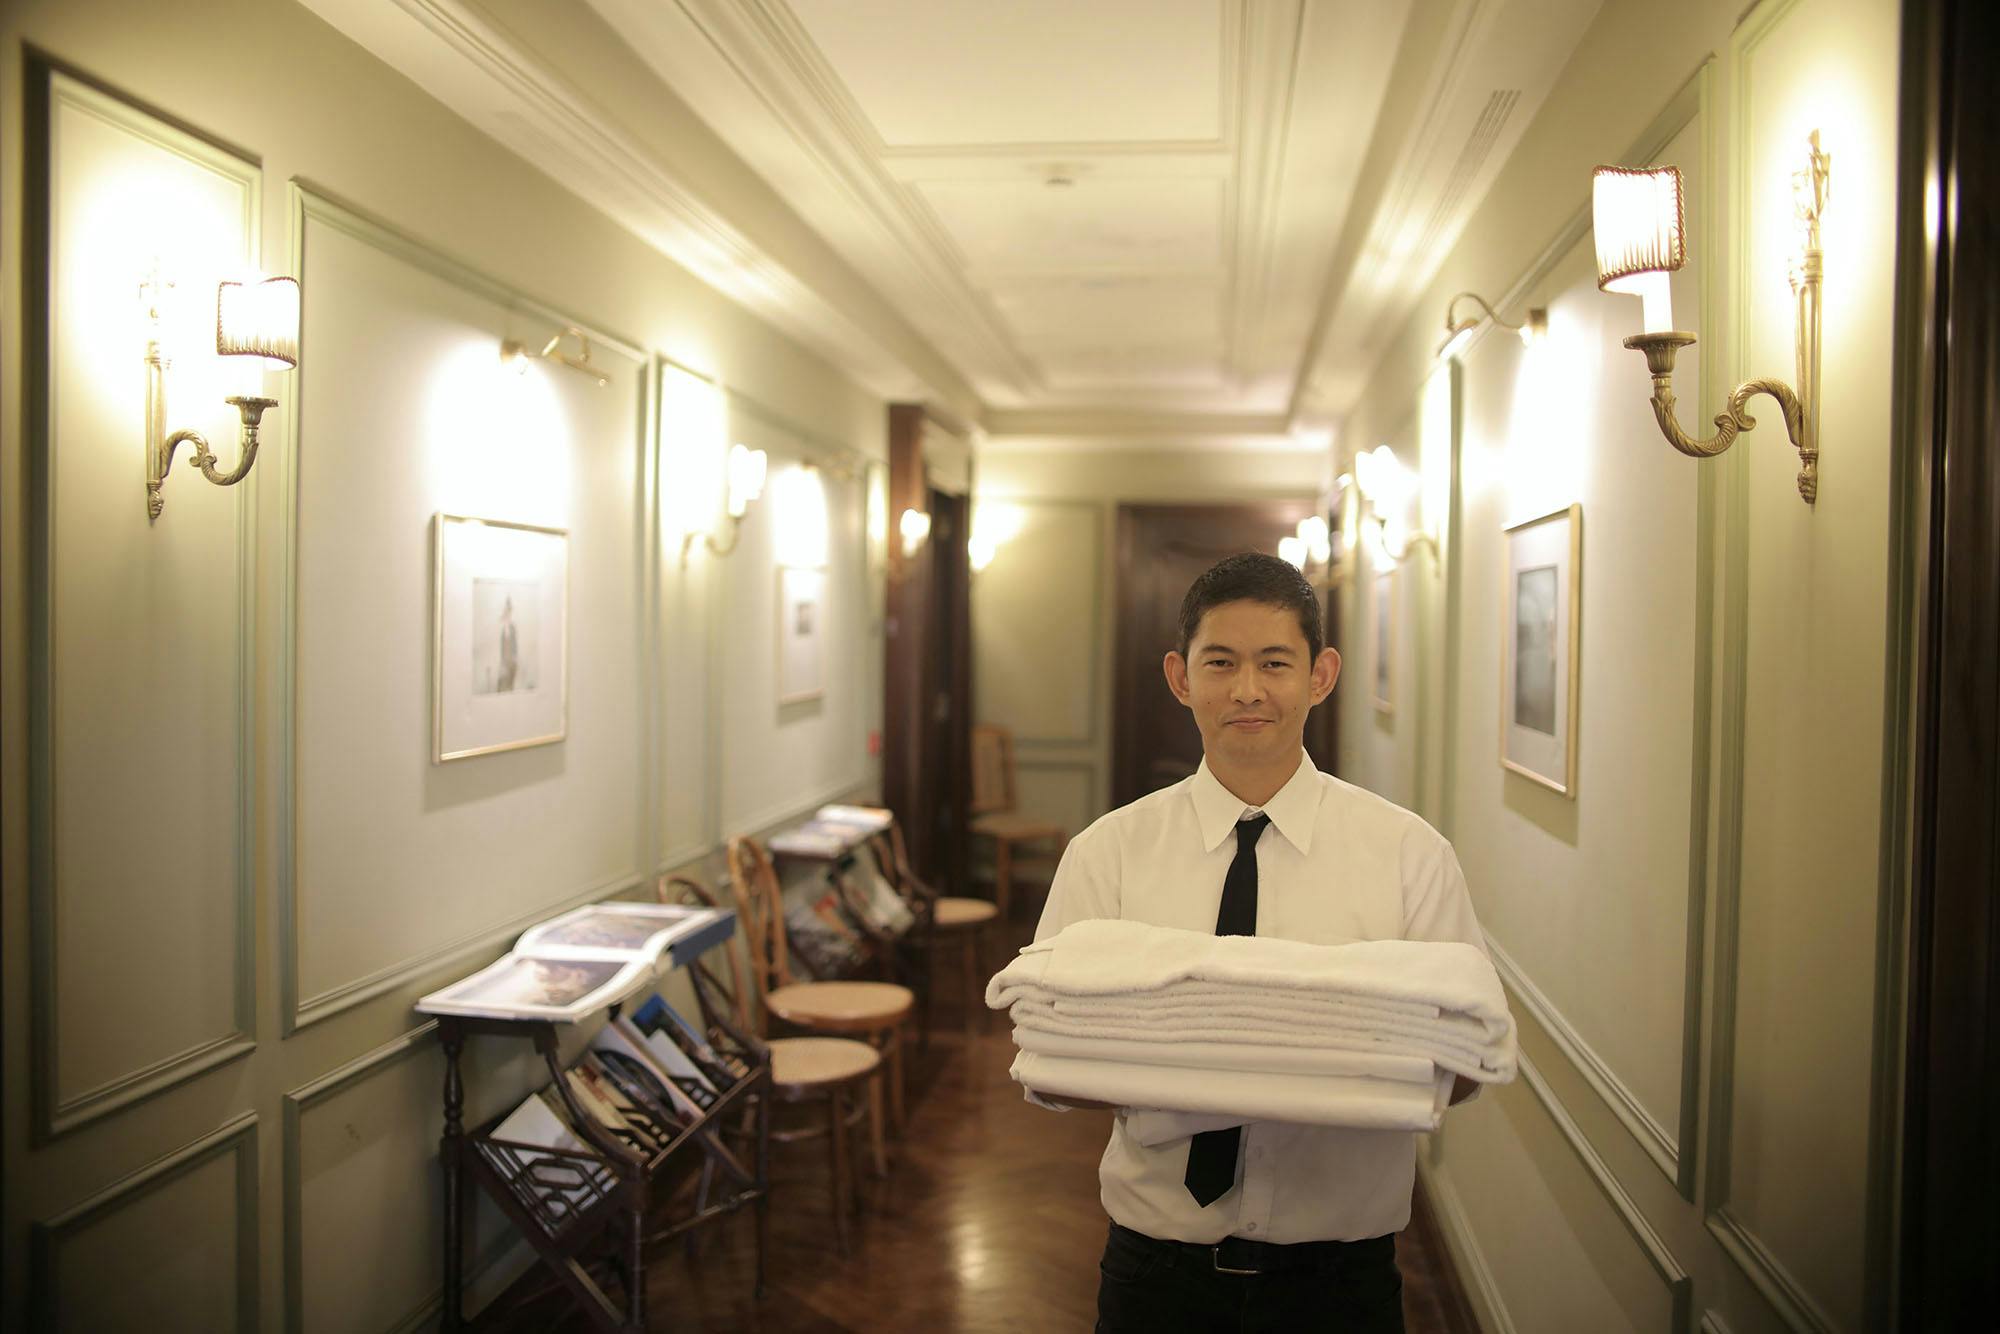 A member working in a hotel environment